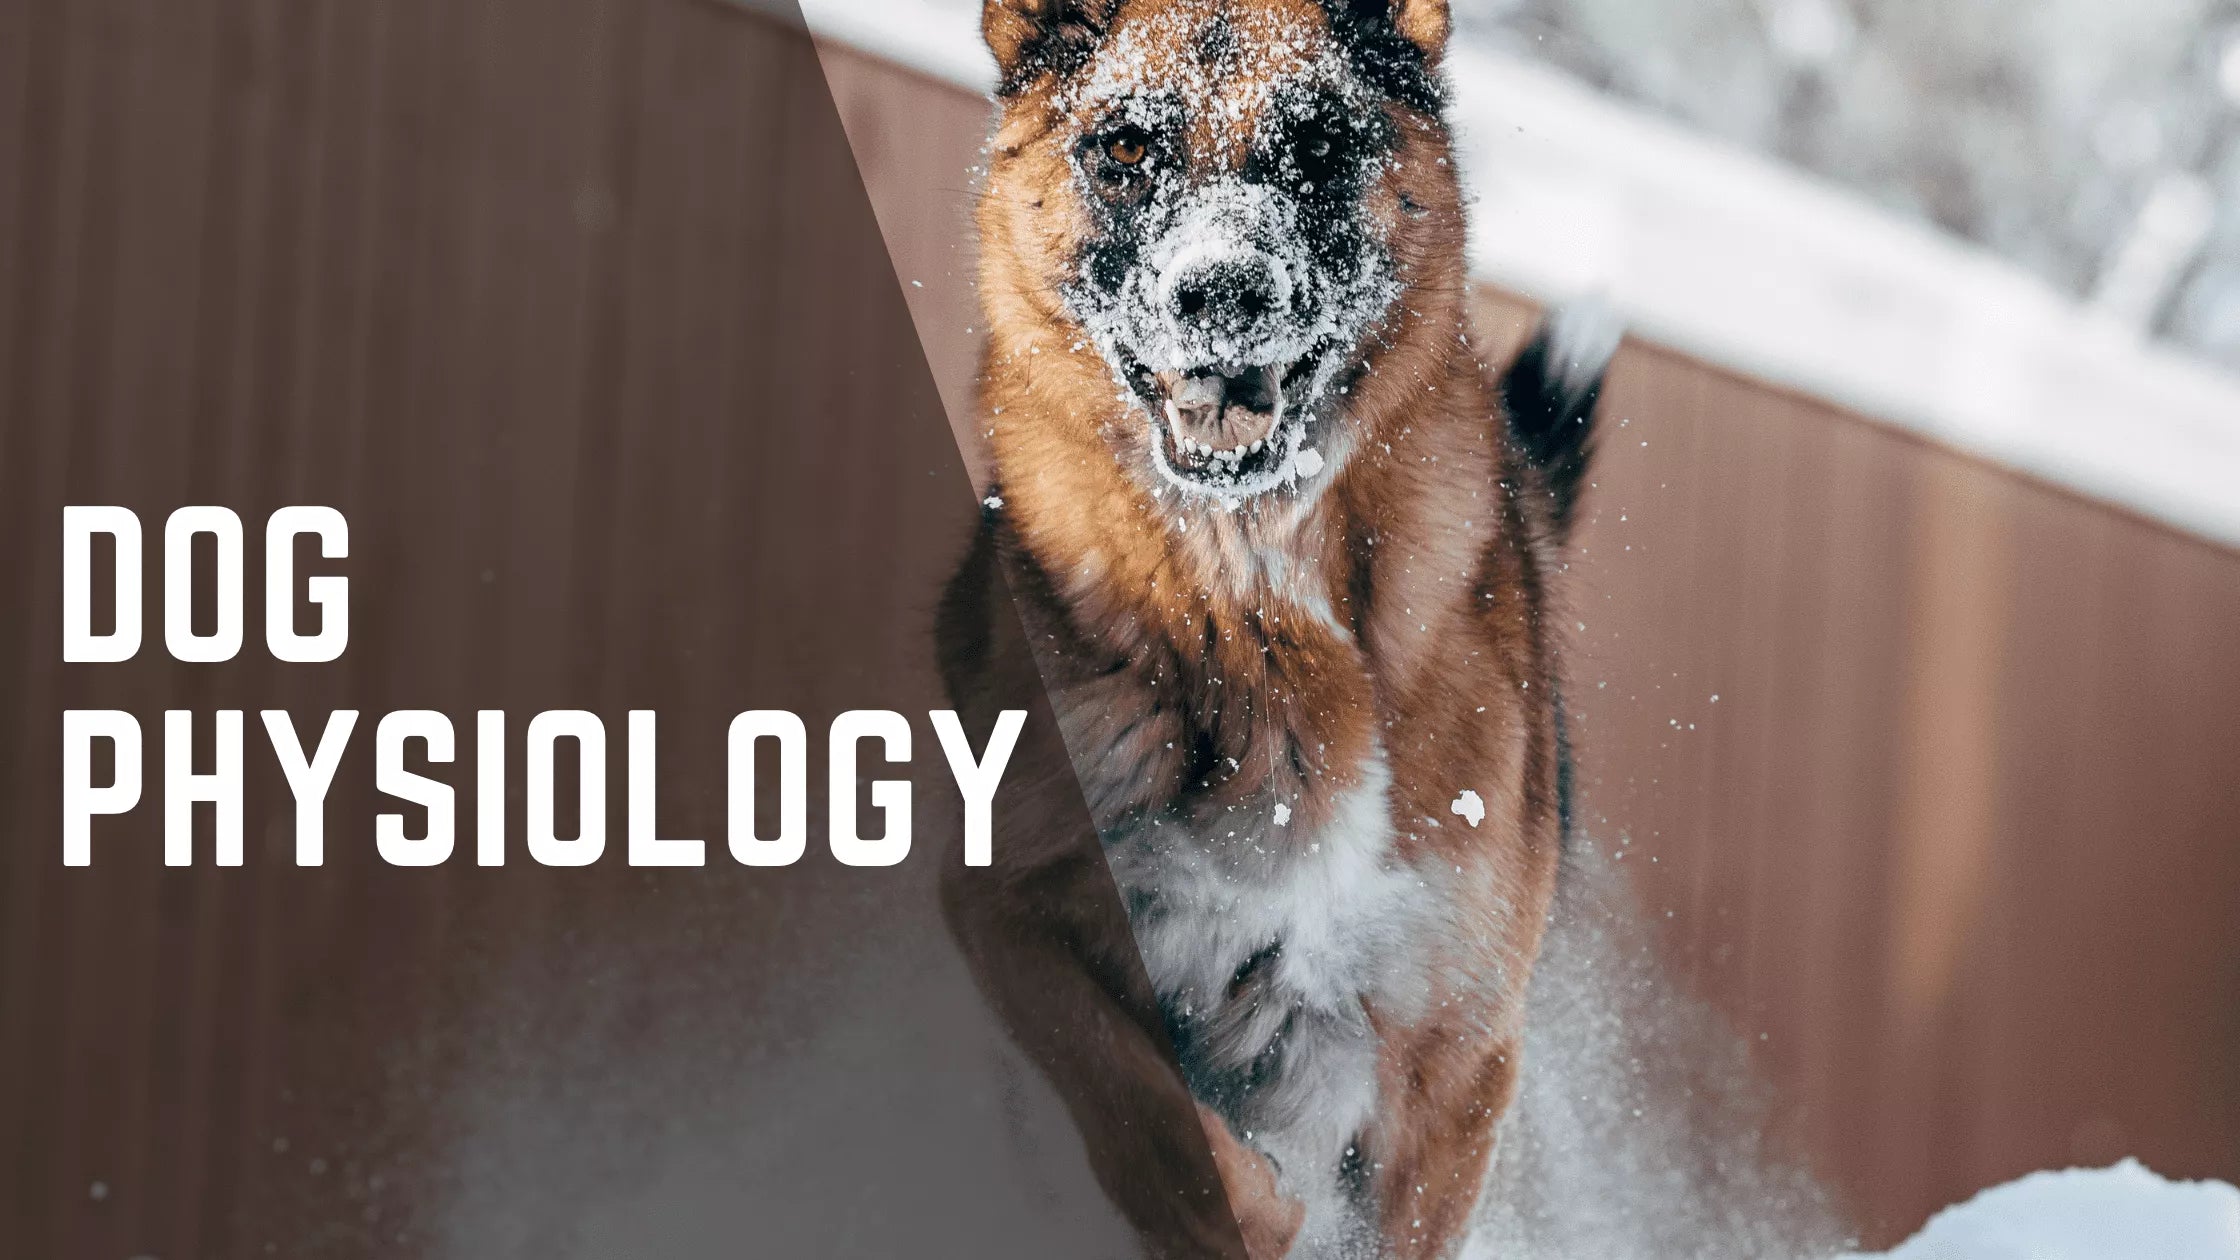 Want To Know About On Dog’s Physiology On How They Move